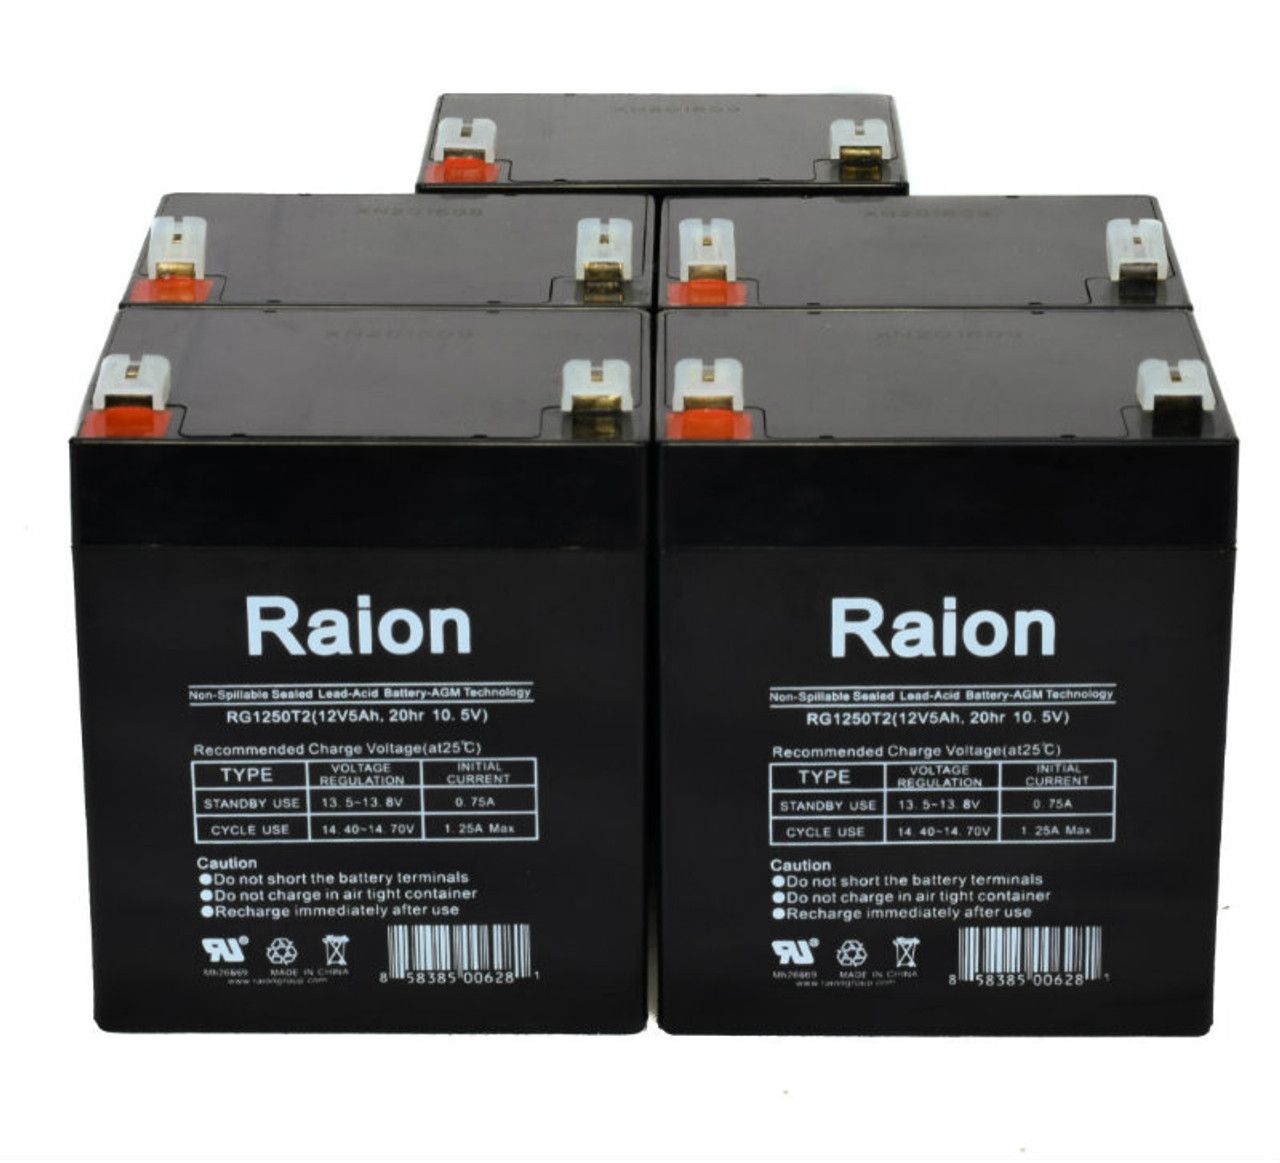 Raion Power RG1250T1 Replacement Fire Alarm Control Panel Battery for Napco Alarms MA1016E - 5 Pack